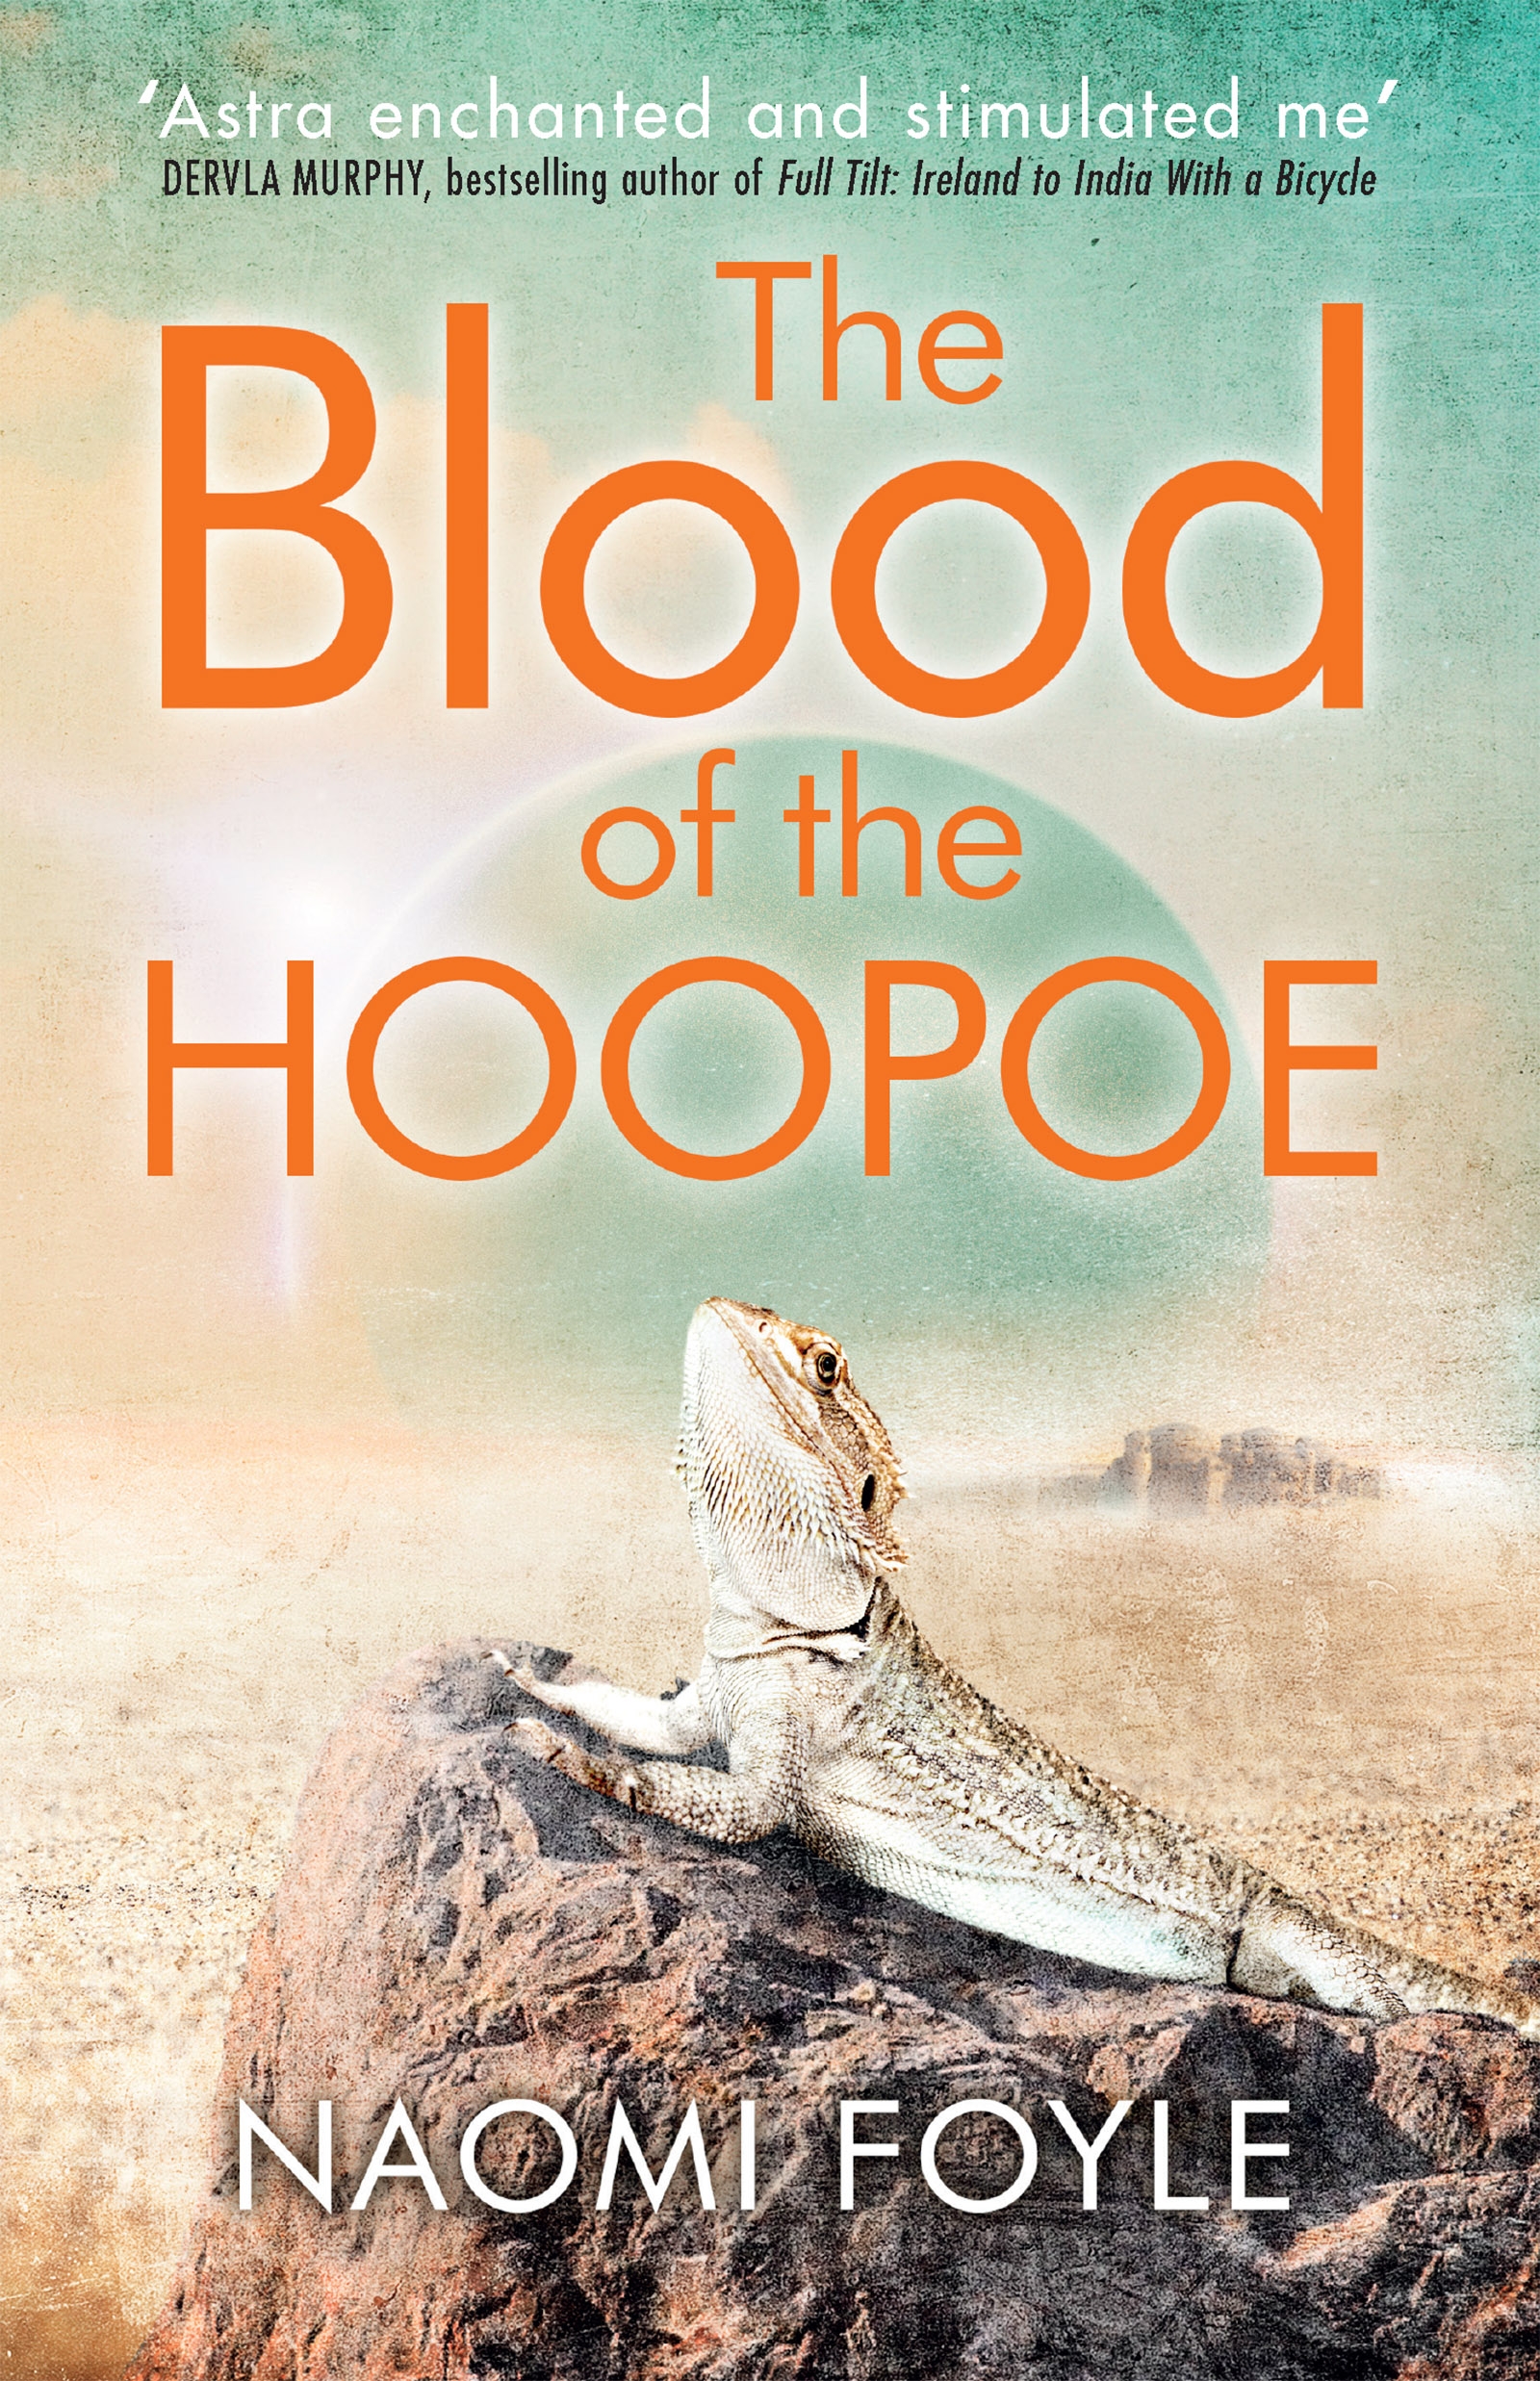 The cover of The Blood of the Hoopoe: The Gaia Chronicles Book 3. An image of a white lizard, sunning itself on a desert rock. - ©Jo Fletcher Books/Andy Vella